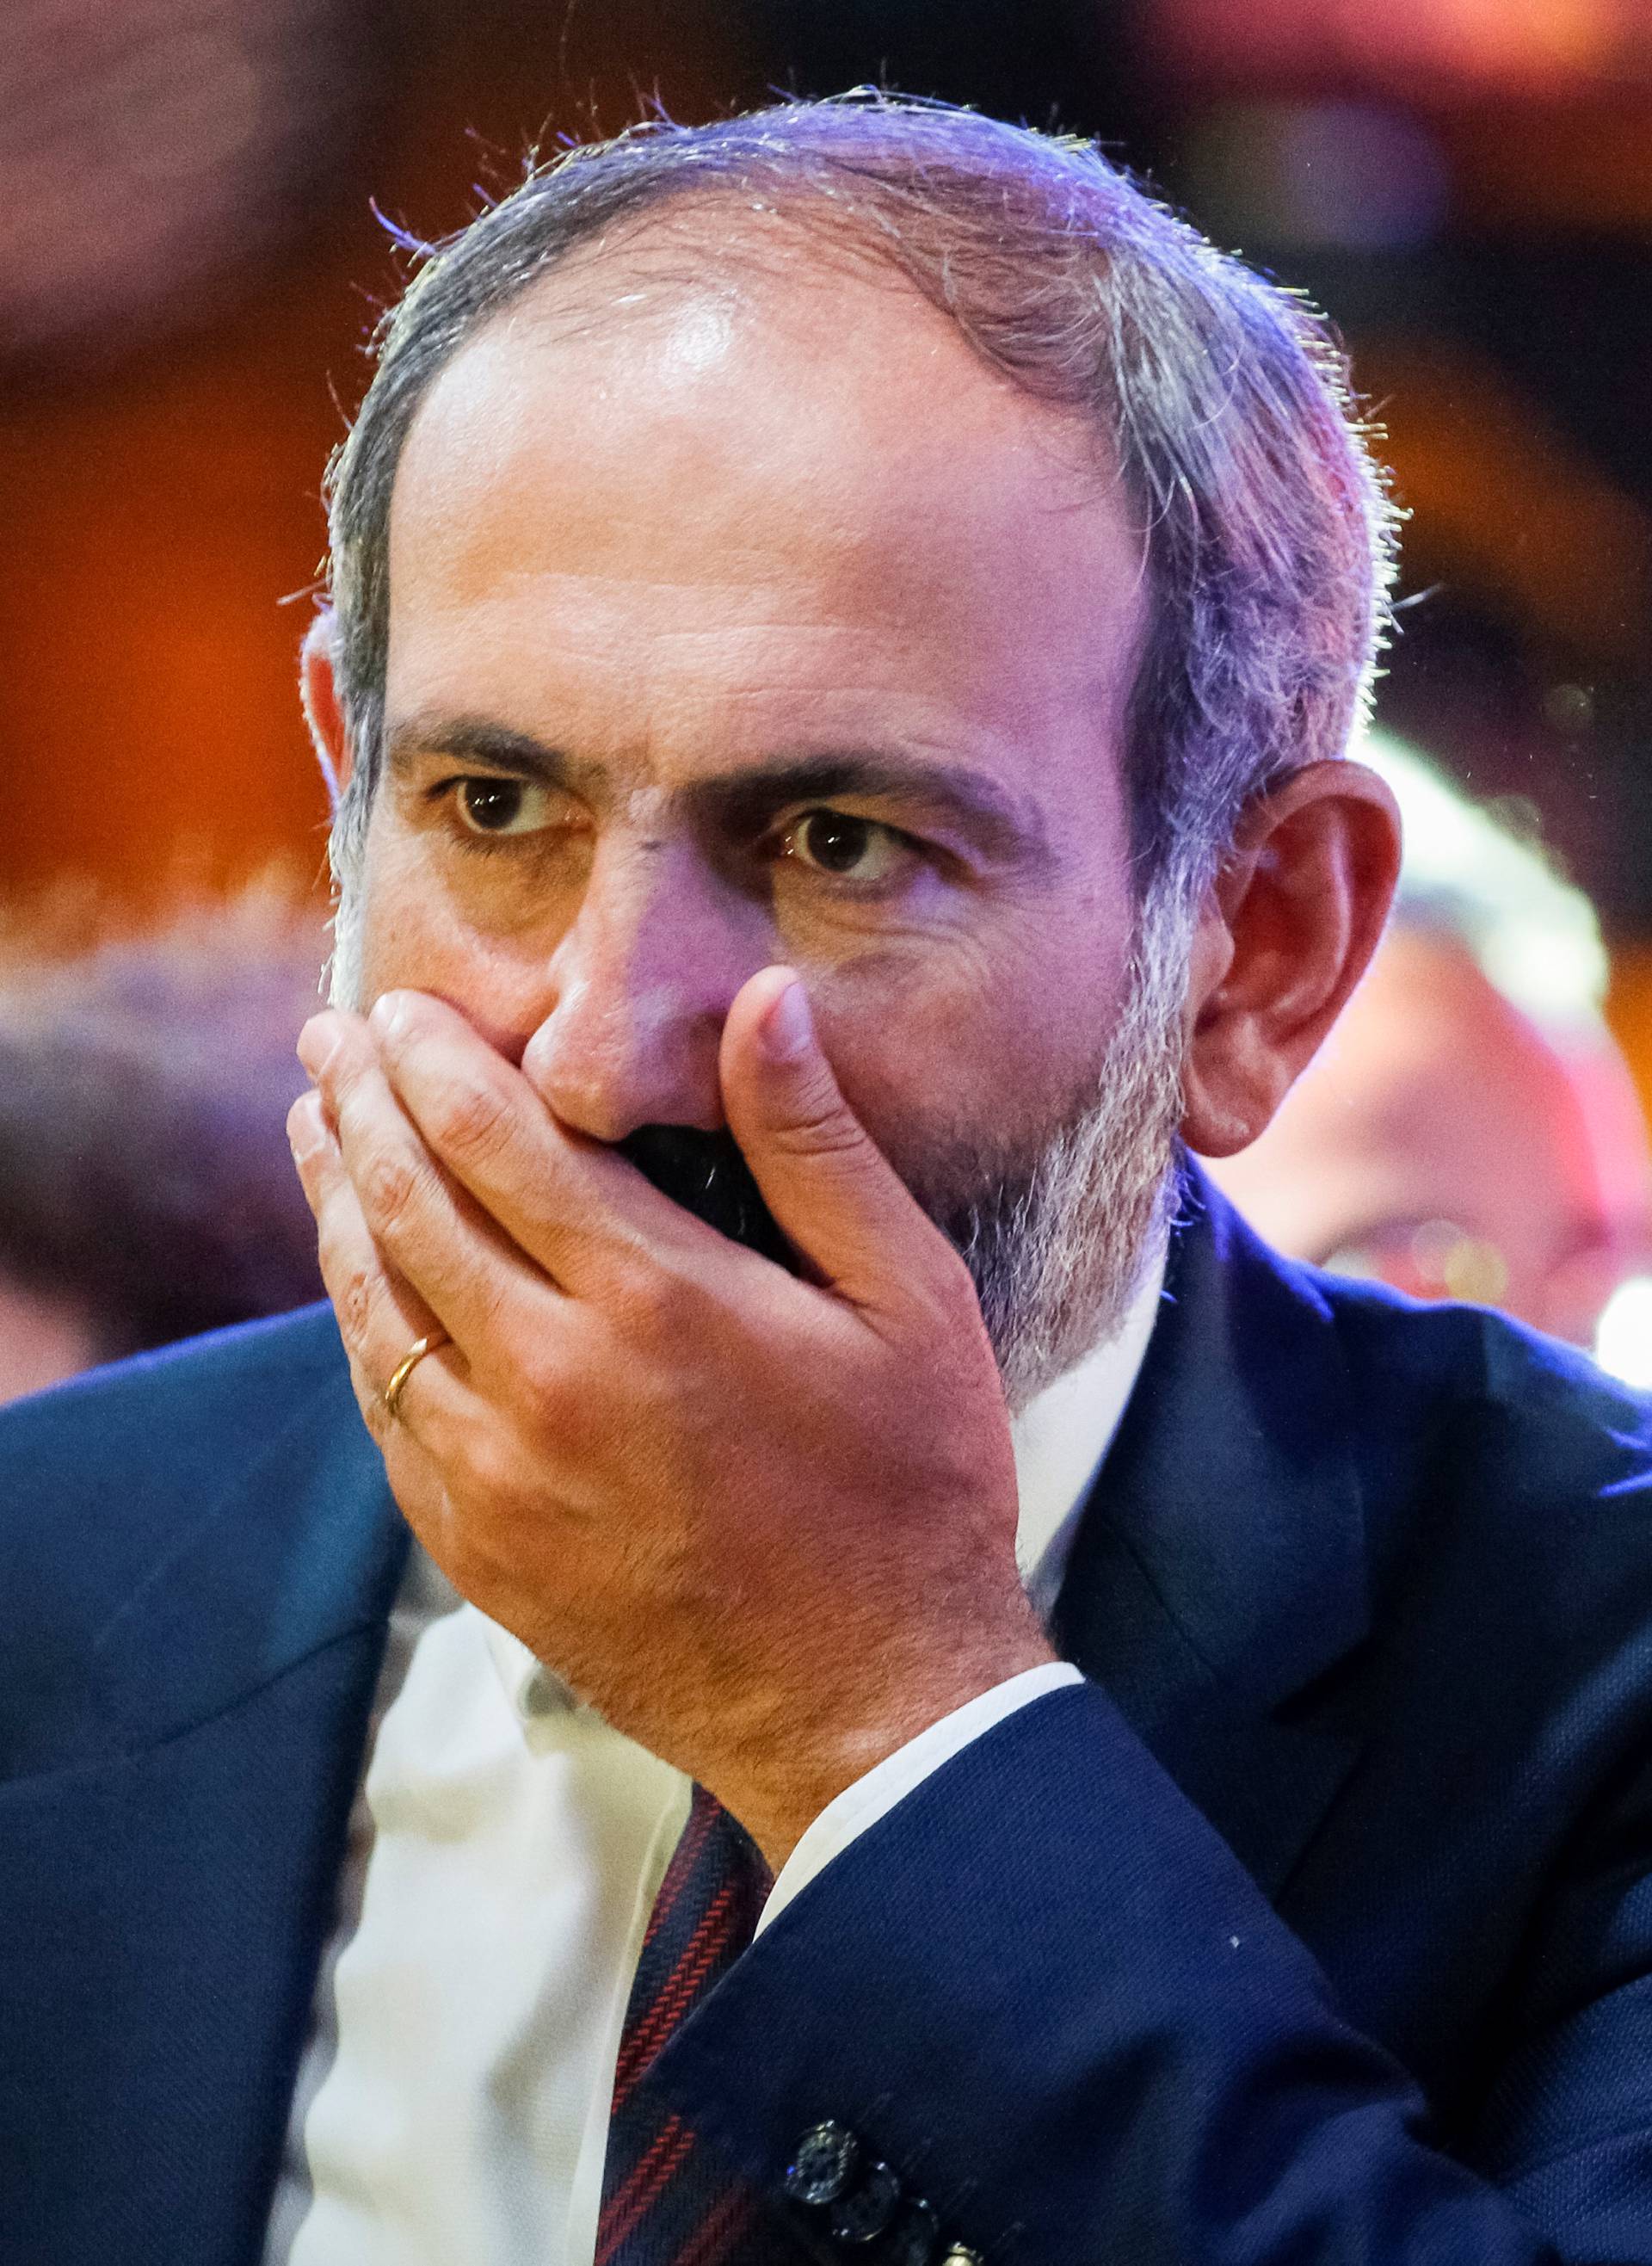 Armenian opposition leader Pashinyan attends a rally in Yerevan